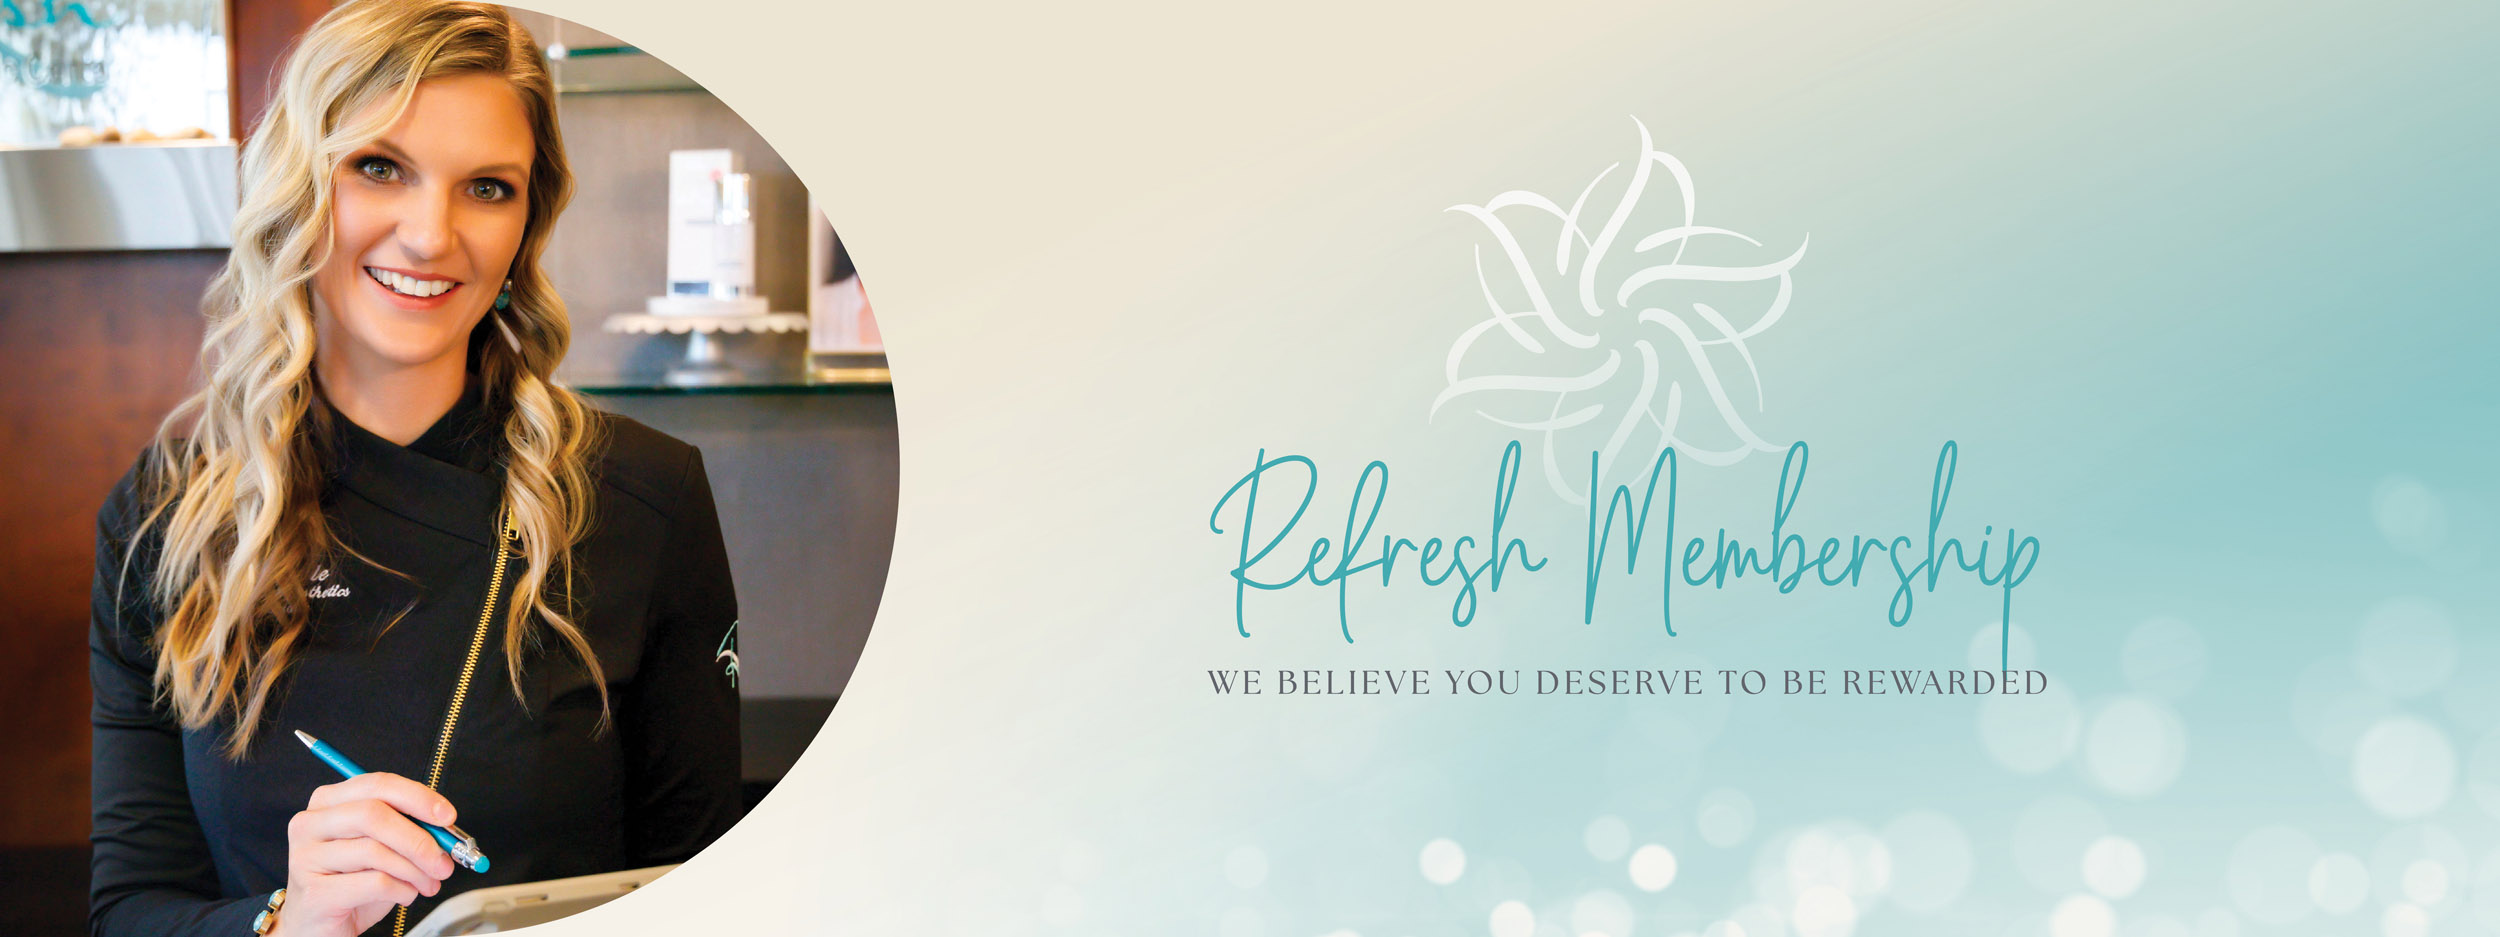 Patient memberships for rejuvenation services and promotions from Refresh Aesthetic Center in Whitefish Bay WI